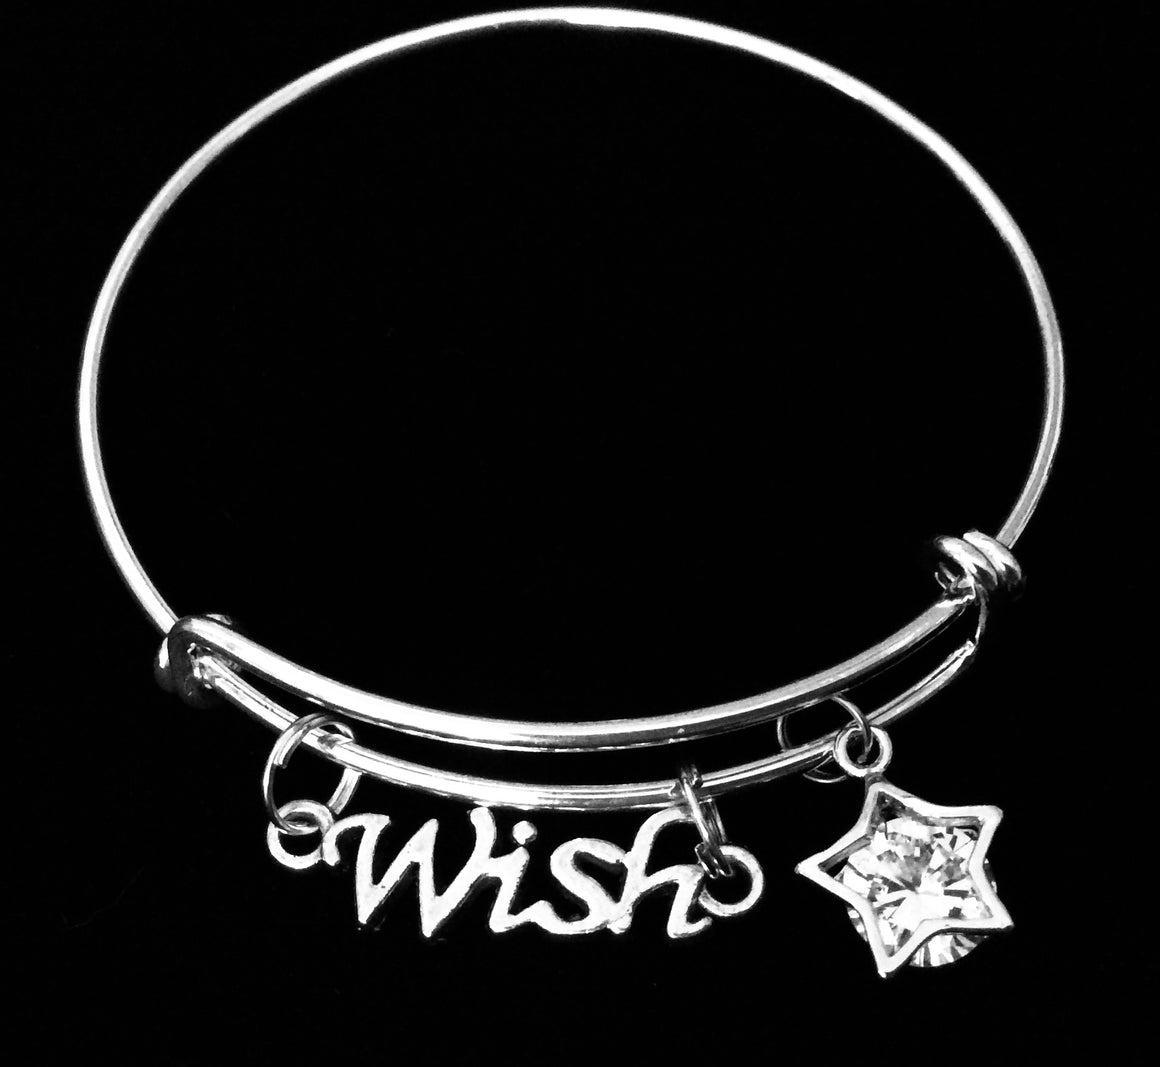 Wish Crystal Star Expandable Charm Bracelet Adjustable Silver Bangle One Size Fits All Gift